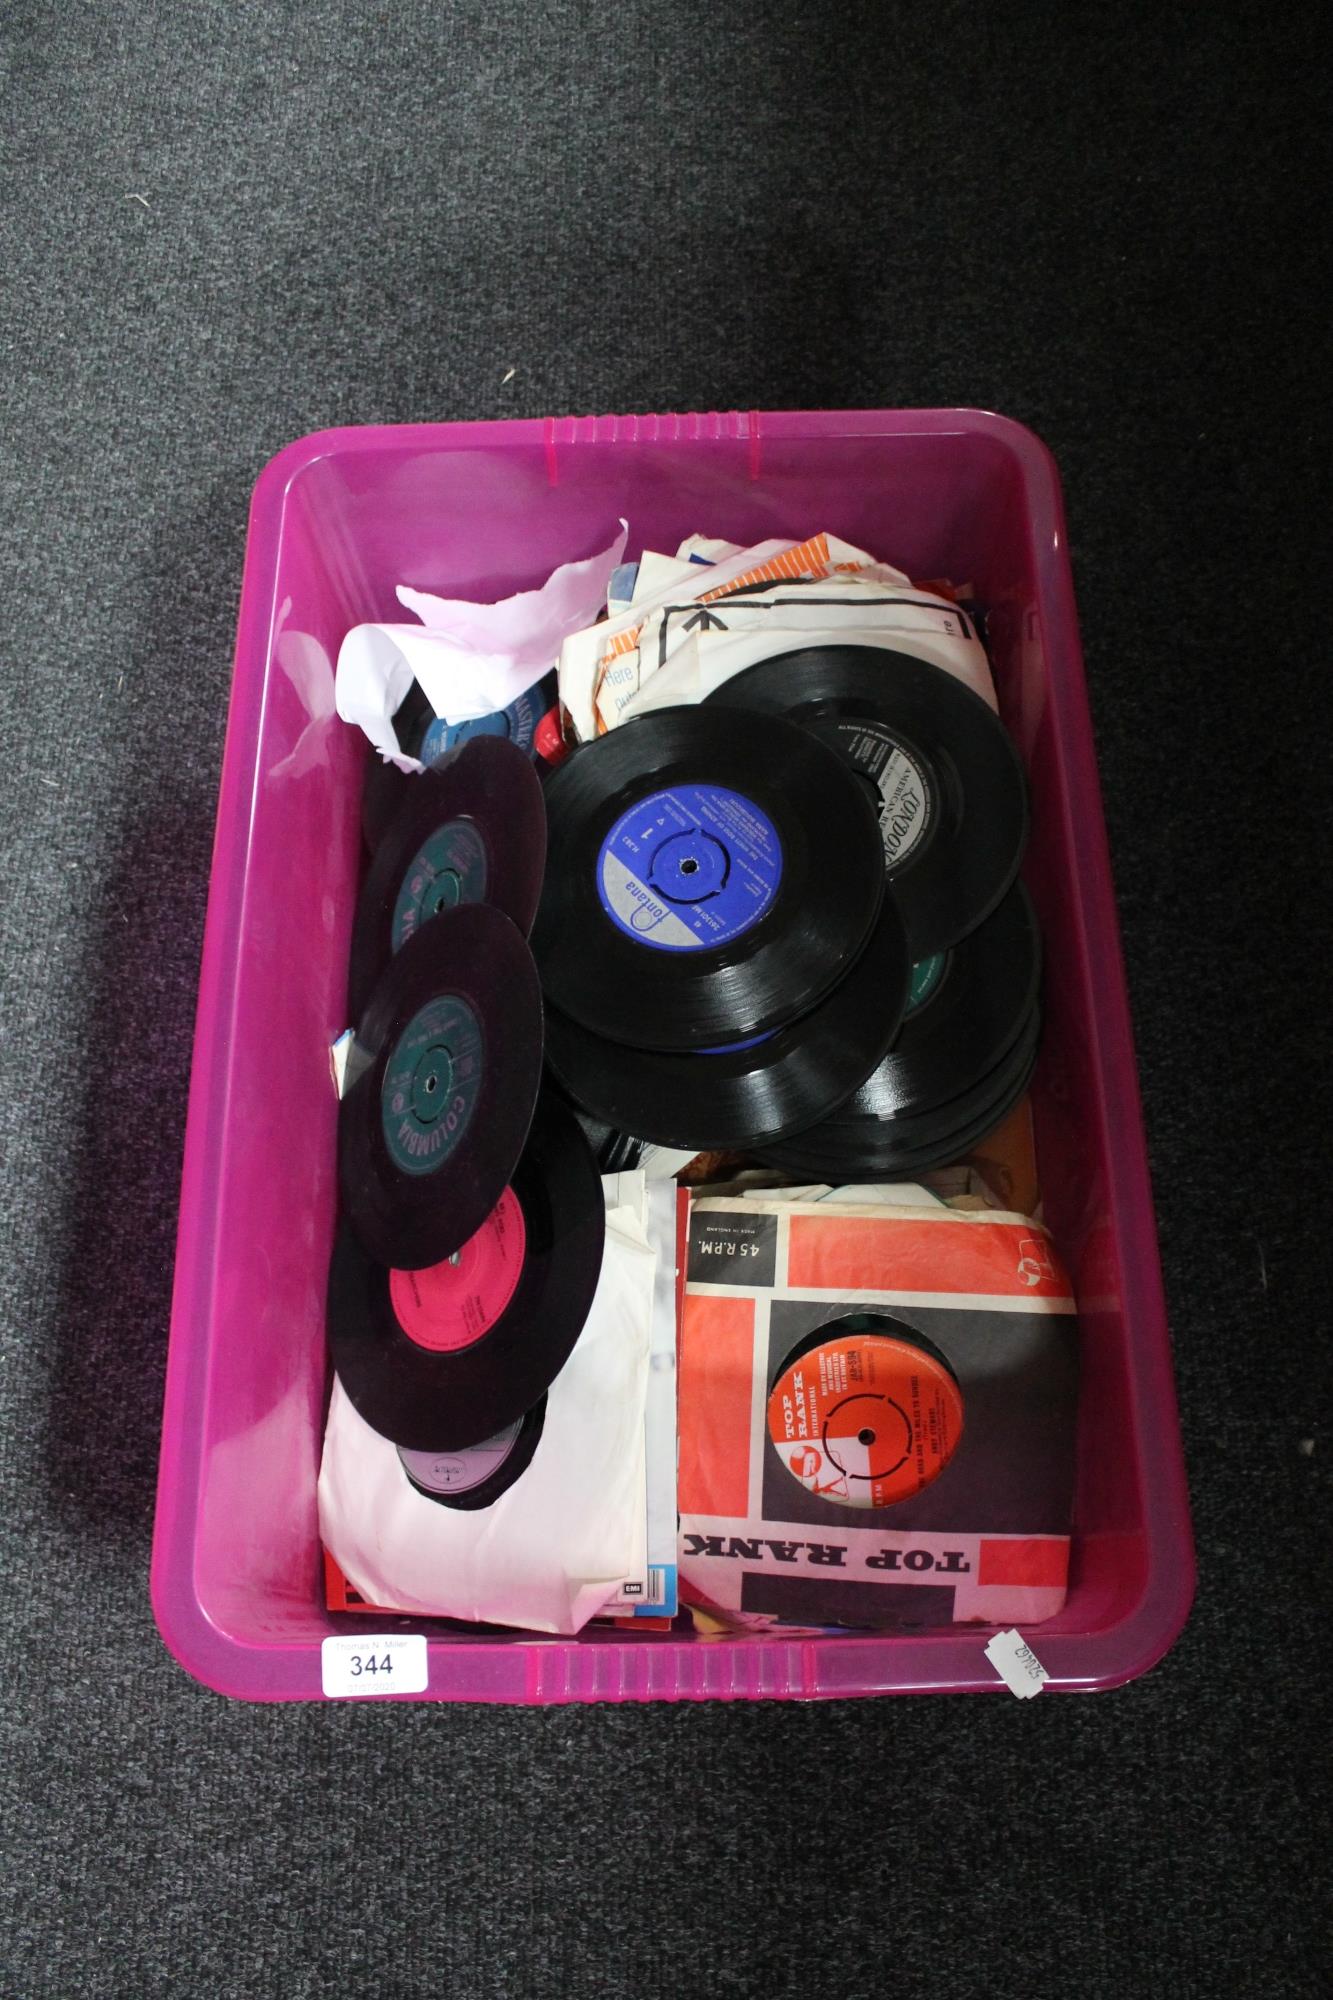 A box of singles - rock and pop